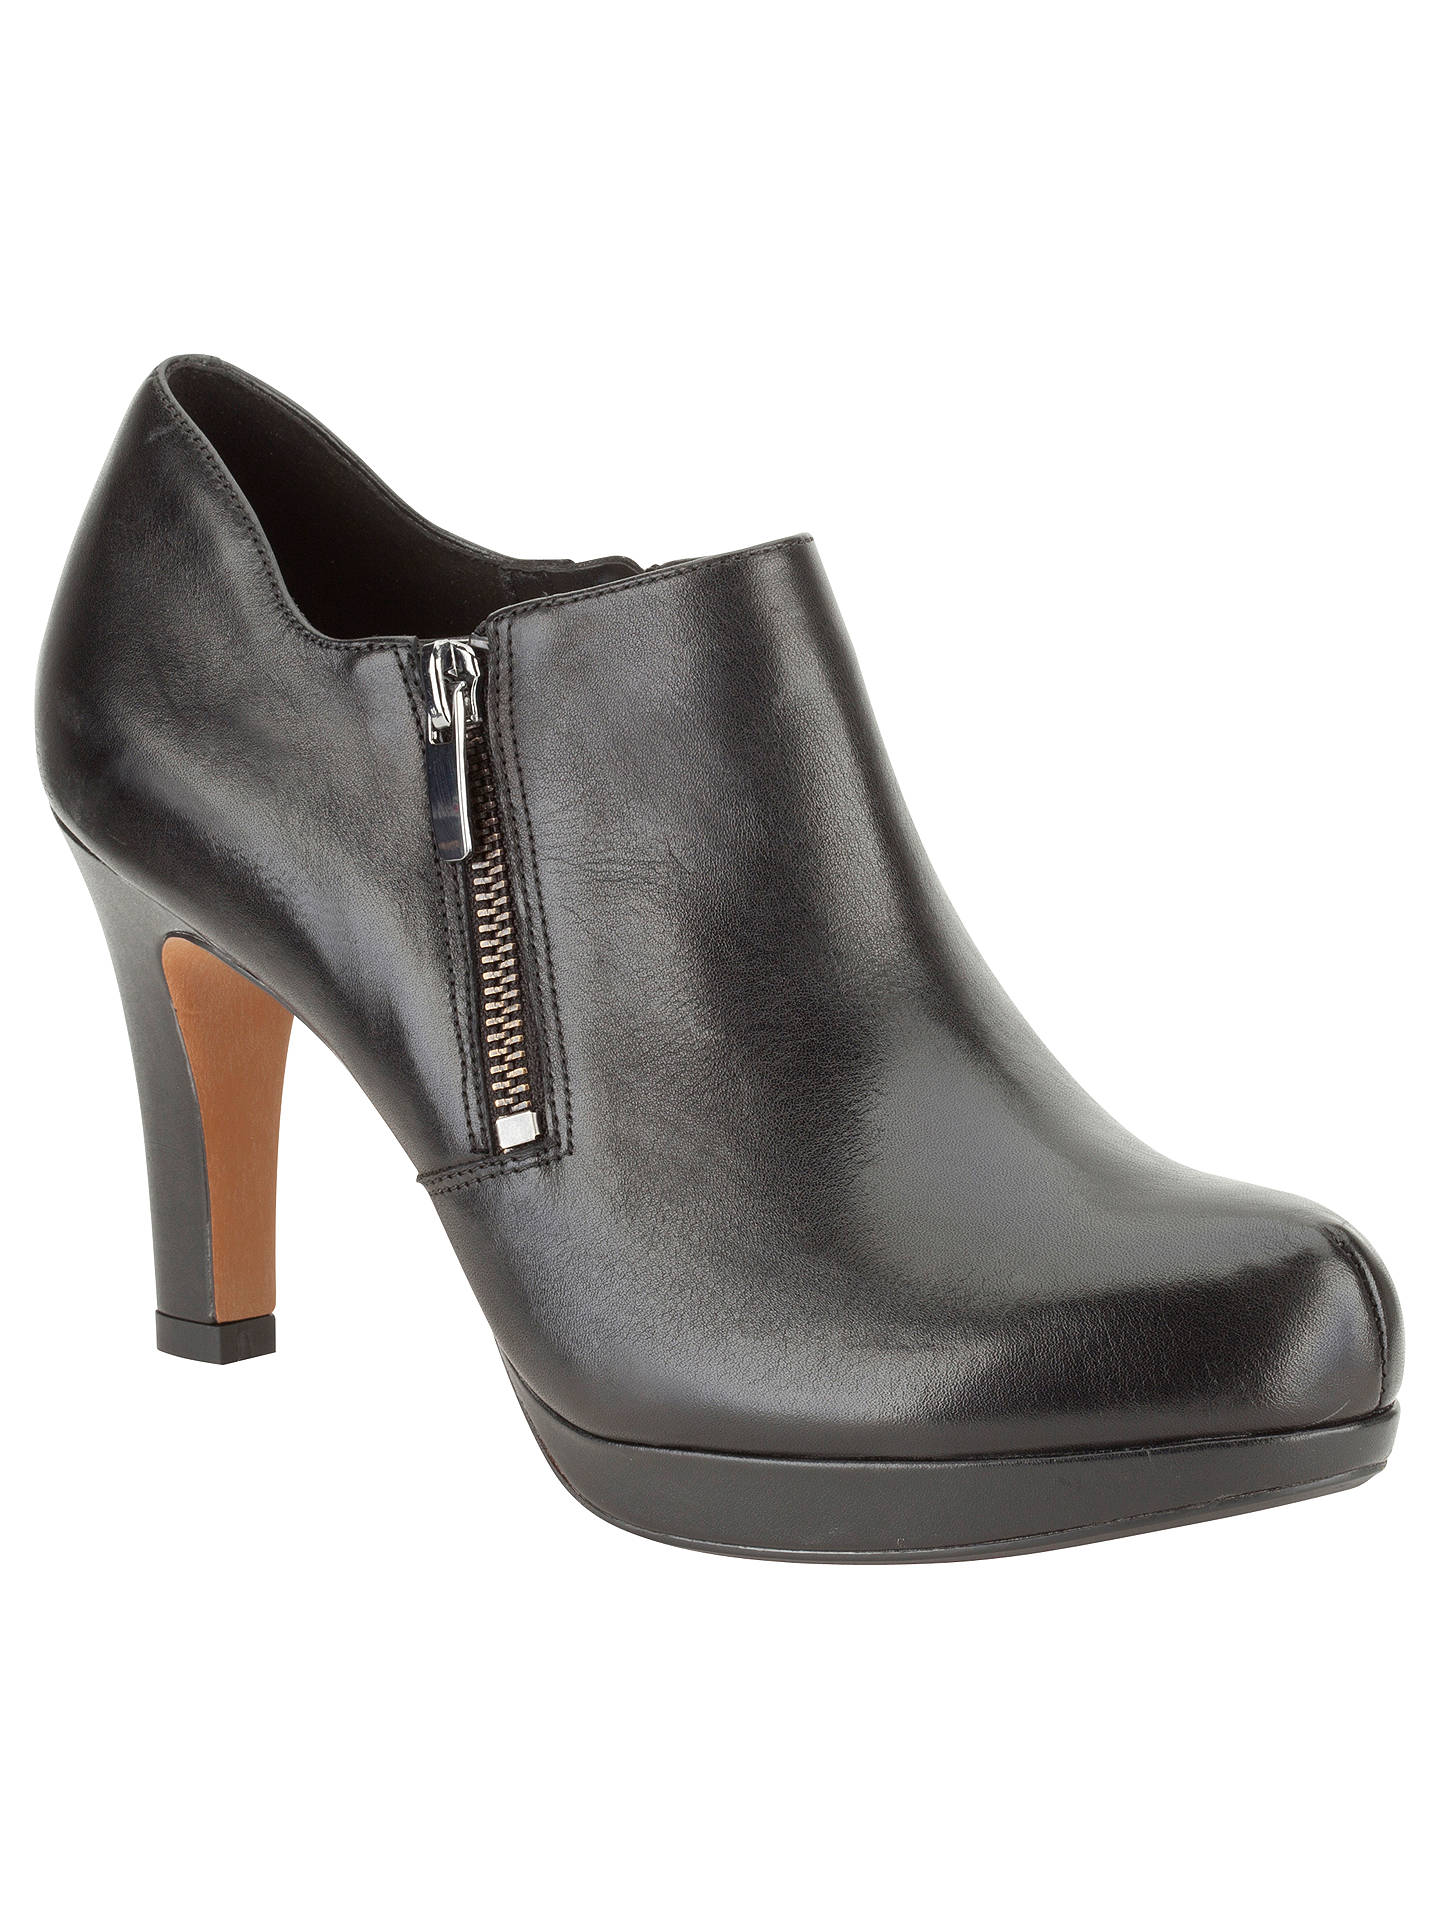 Clarks Amos Kendra Leather Ankle Boots, Black at John Lewis & Partners